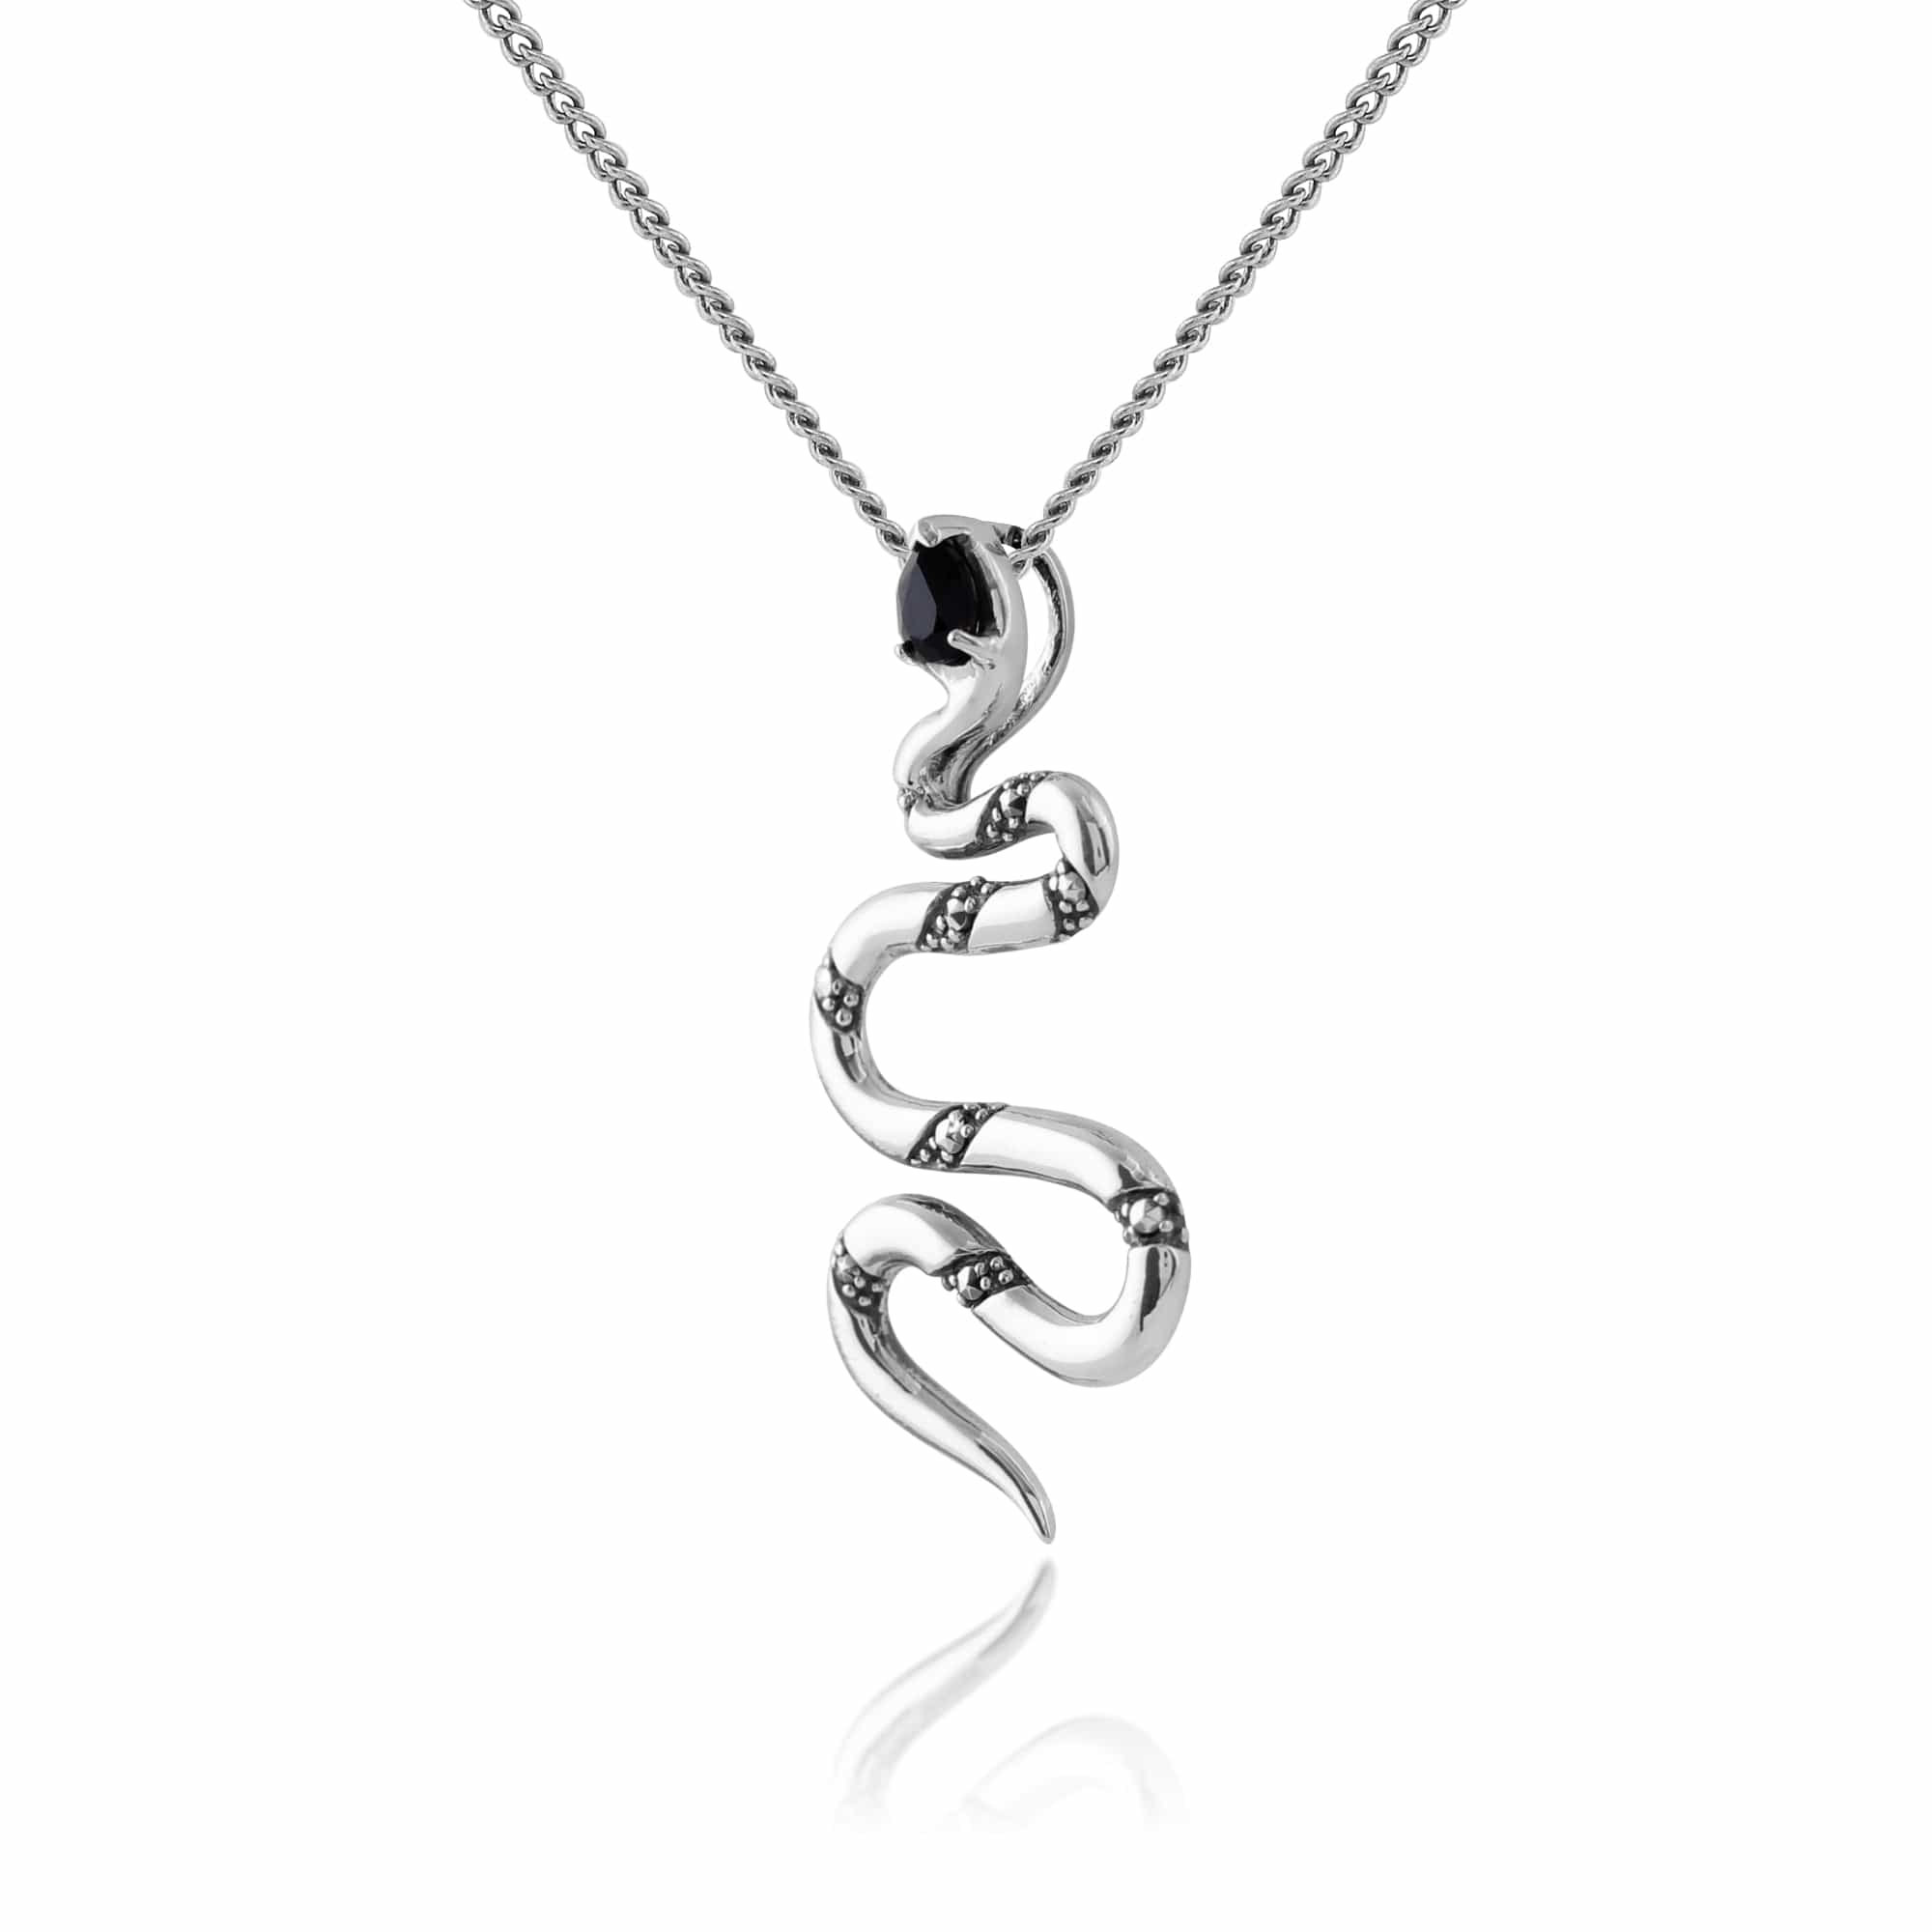 Art Deco Style Pear Black Spinel & Marcasite Snake Necklace in 925 Sterling Silver - Gemondo